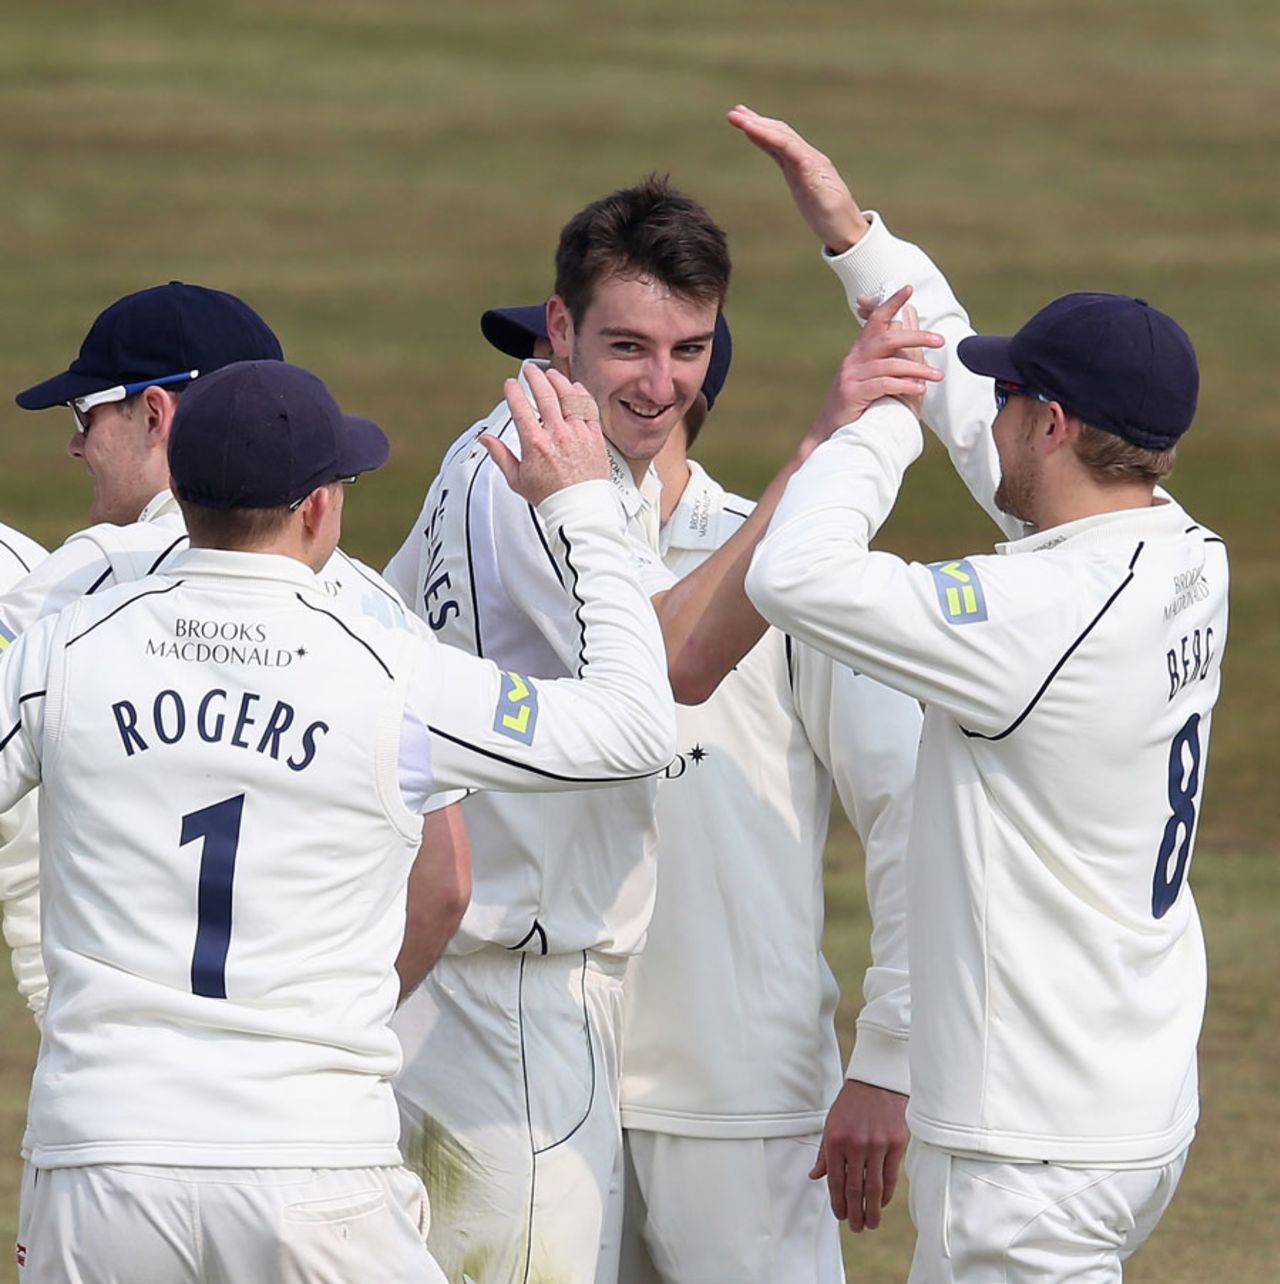 Toby Roland-Jones celebrates a wicket, Nottinghamshire v Middlesex, County Championship, Division One, Trent Bridge, 1st day, April 10, 2013